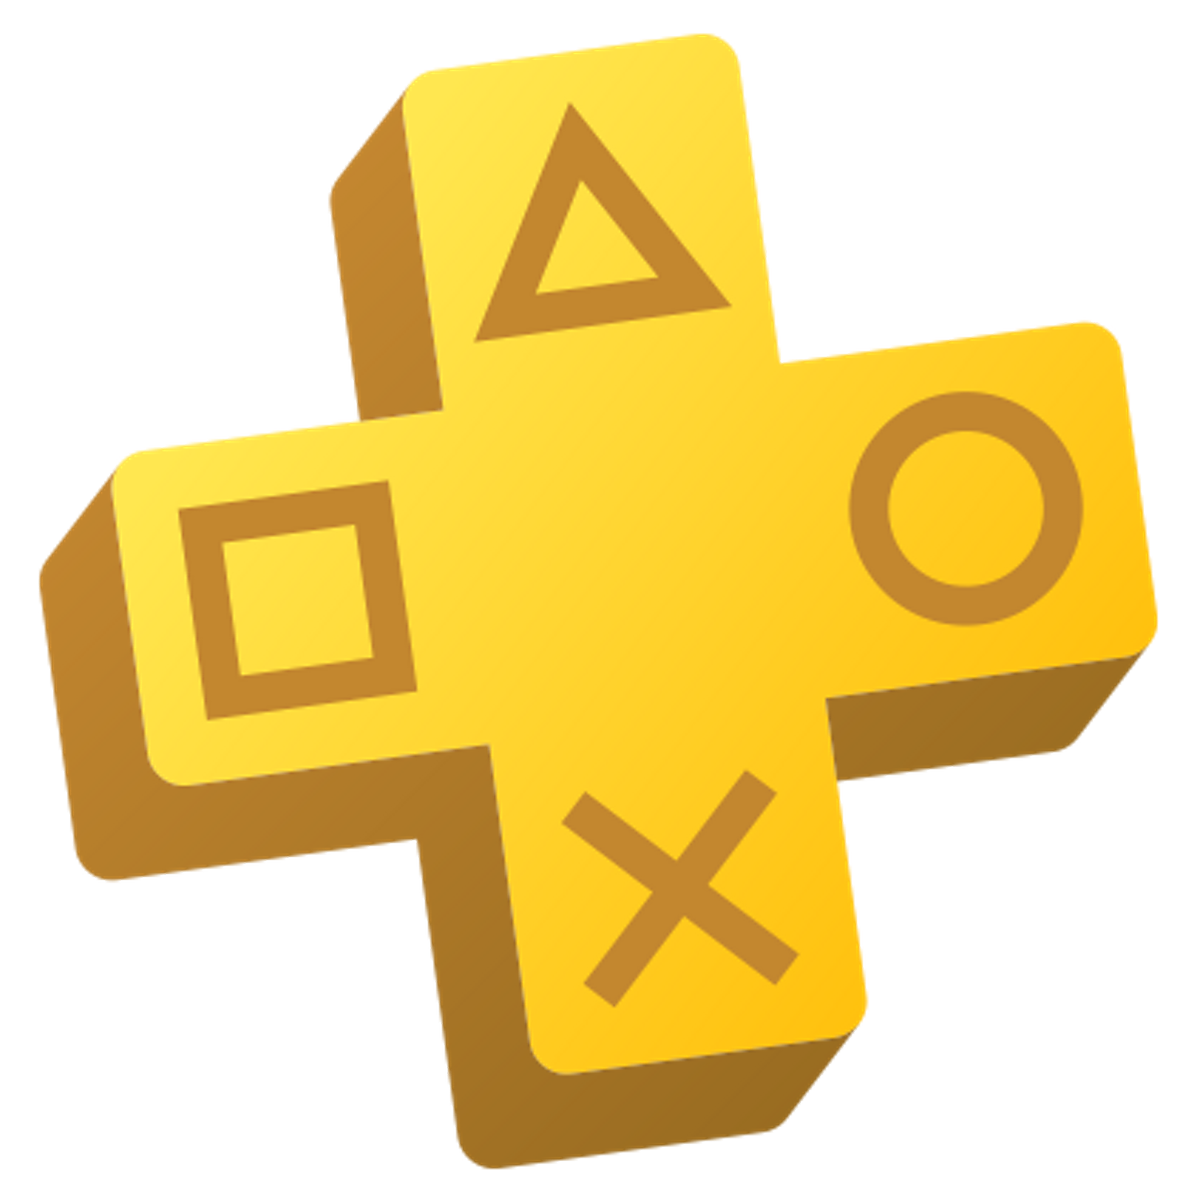 Ask PlayStation on X: With PlayStation Plus, you can find right